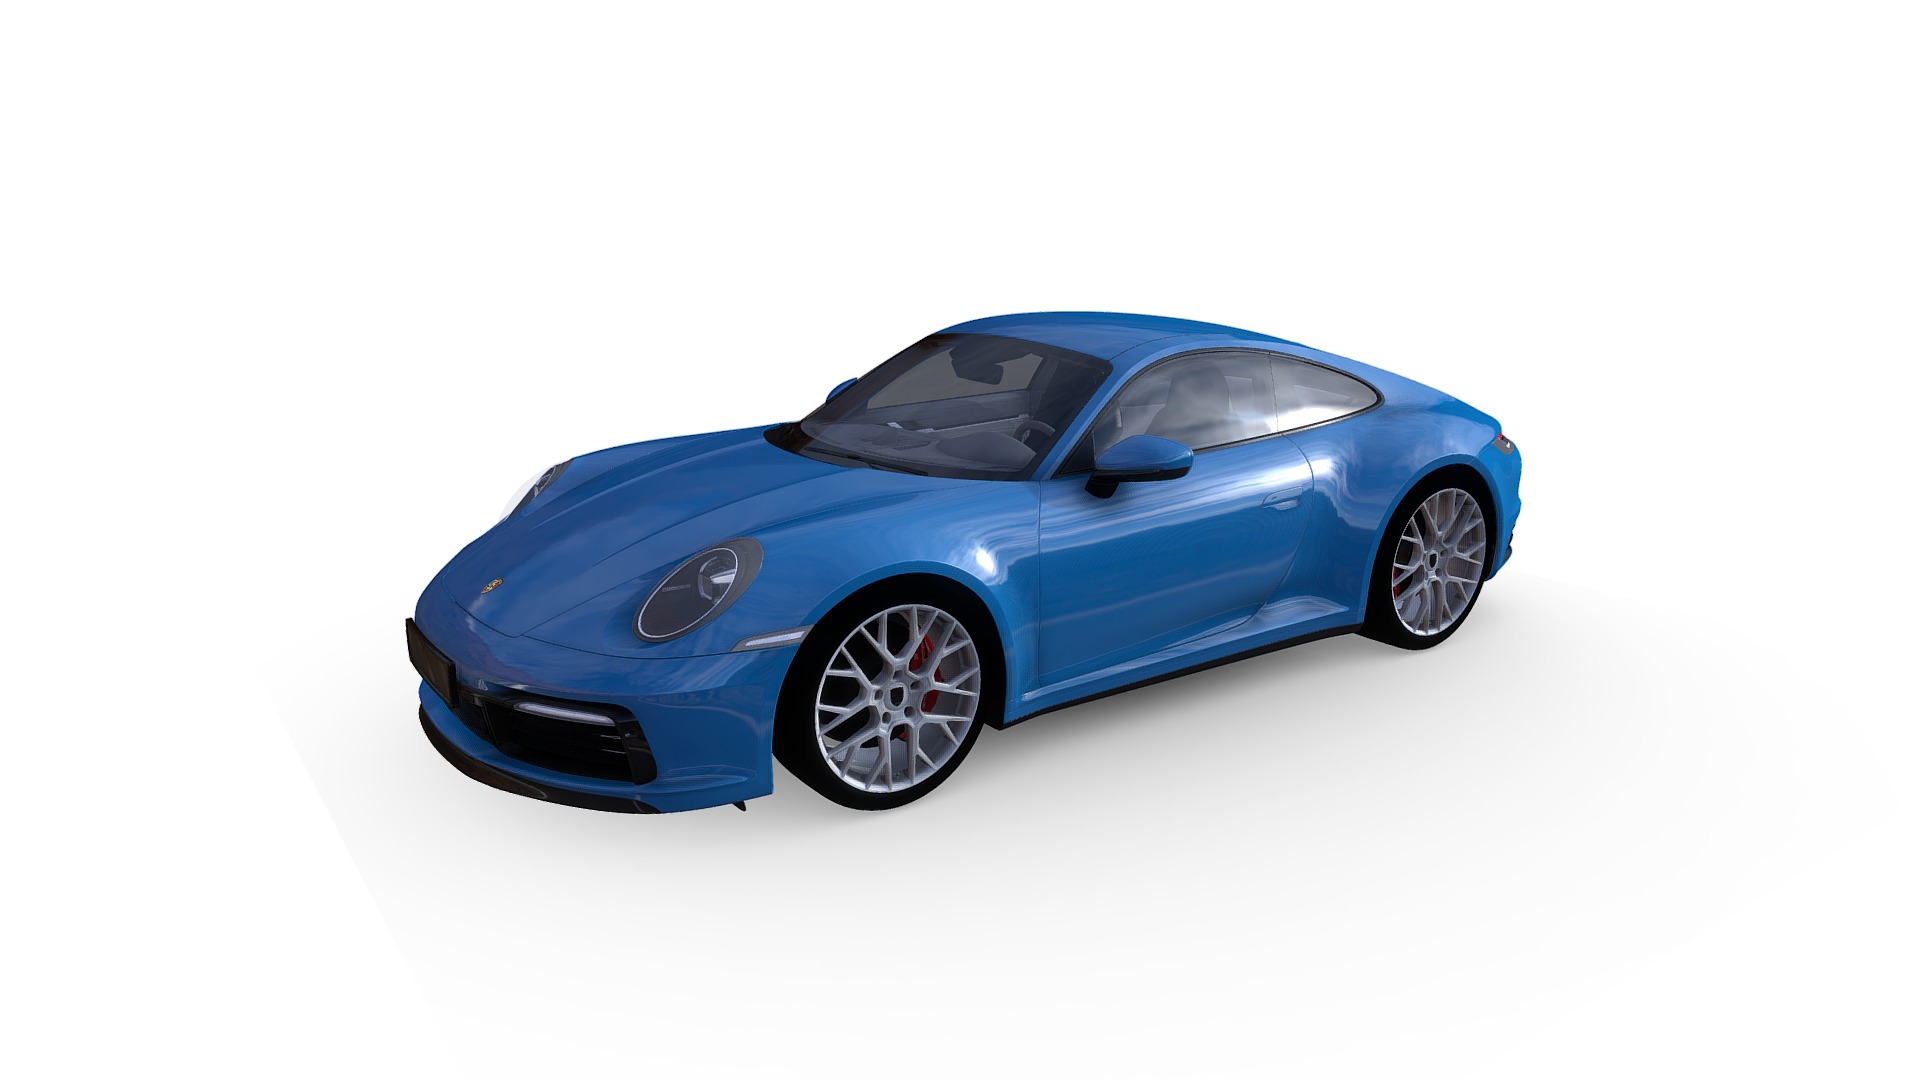 3D model Porsche 911 Carrera 4S 2019 - This is a 3D model of the Porsche 911 Carrera 4S 2019. The 3D model is about a blue car with a white background.